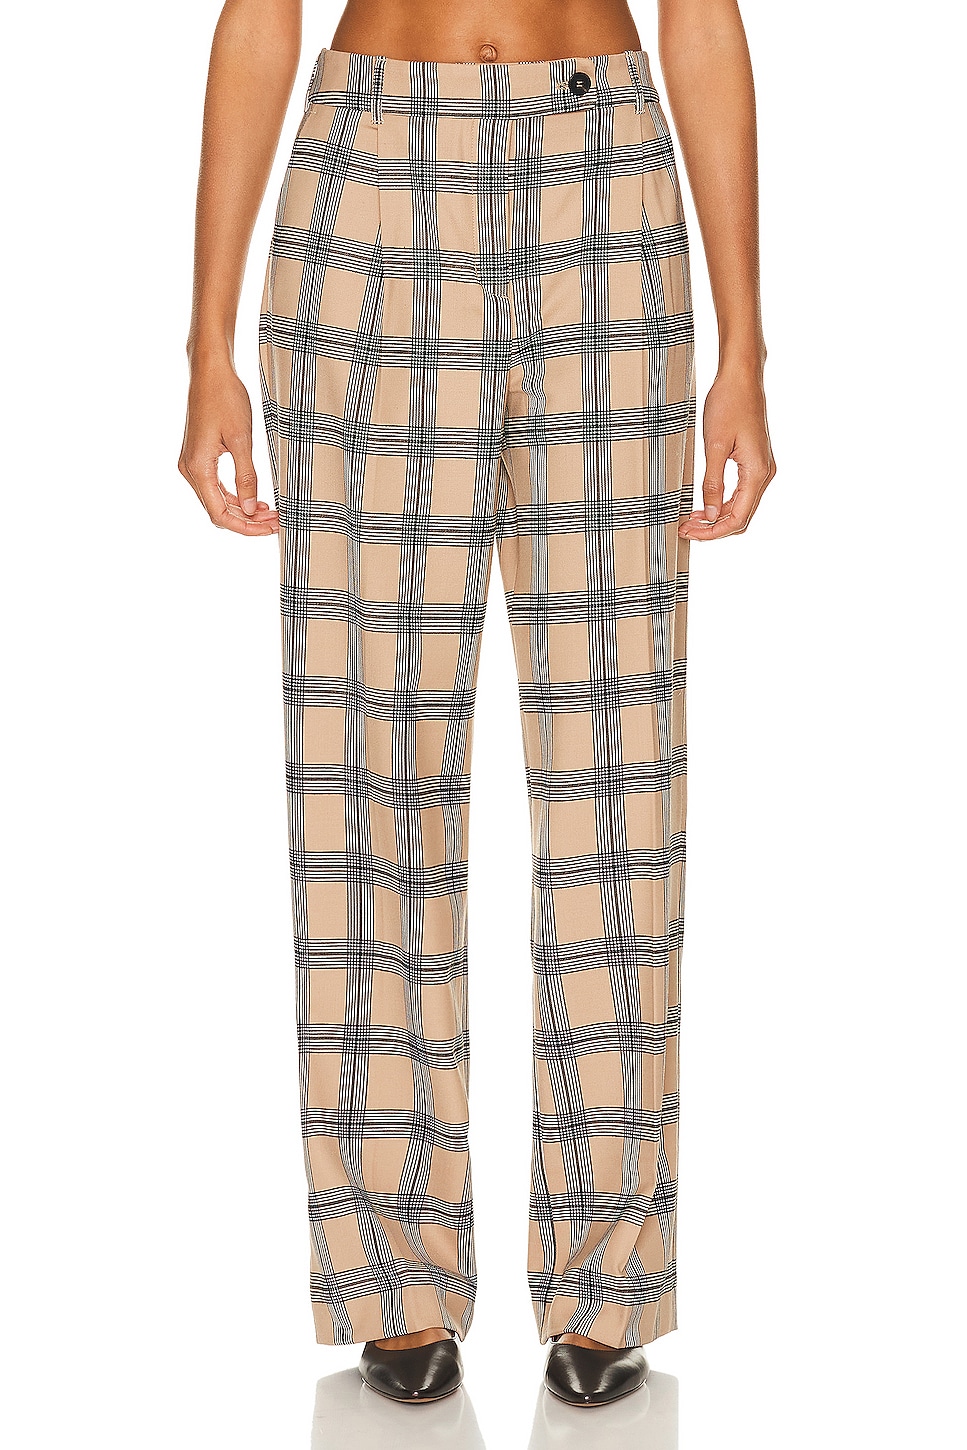 Image 1 of Zimmermann Luminosity Pleat Front Pant in Tan Check